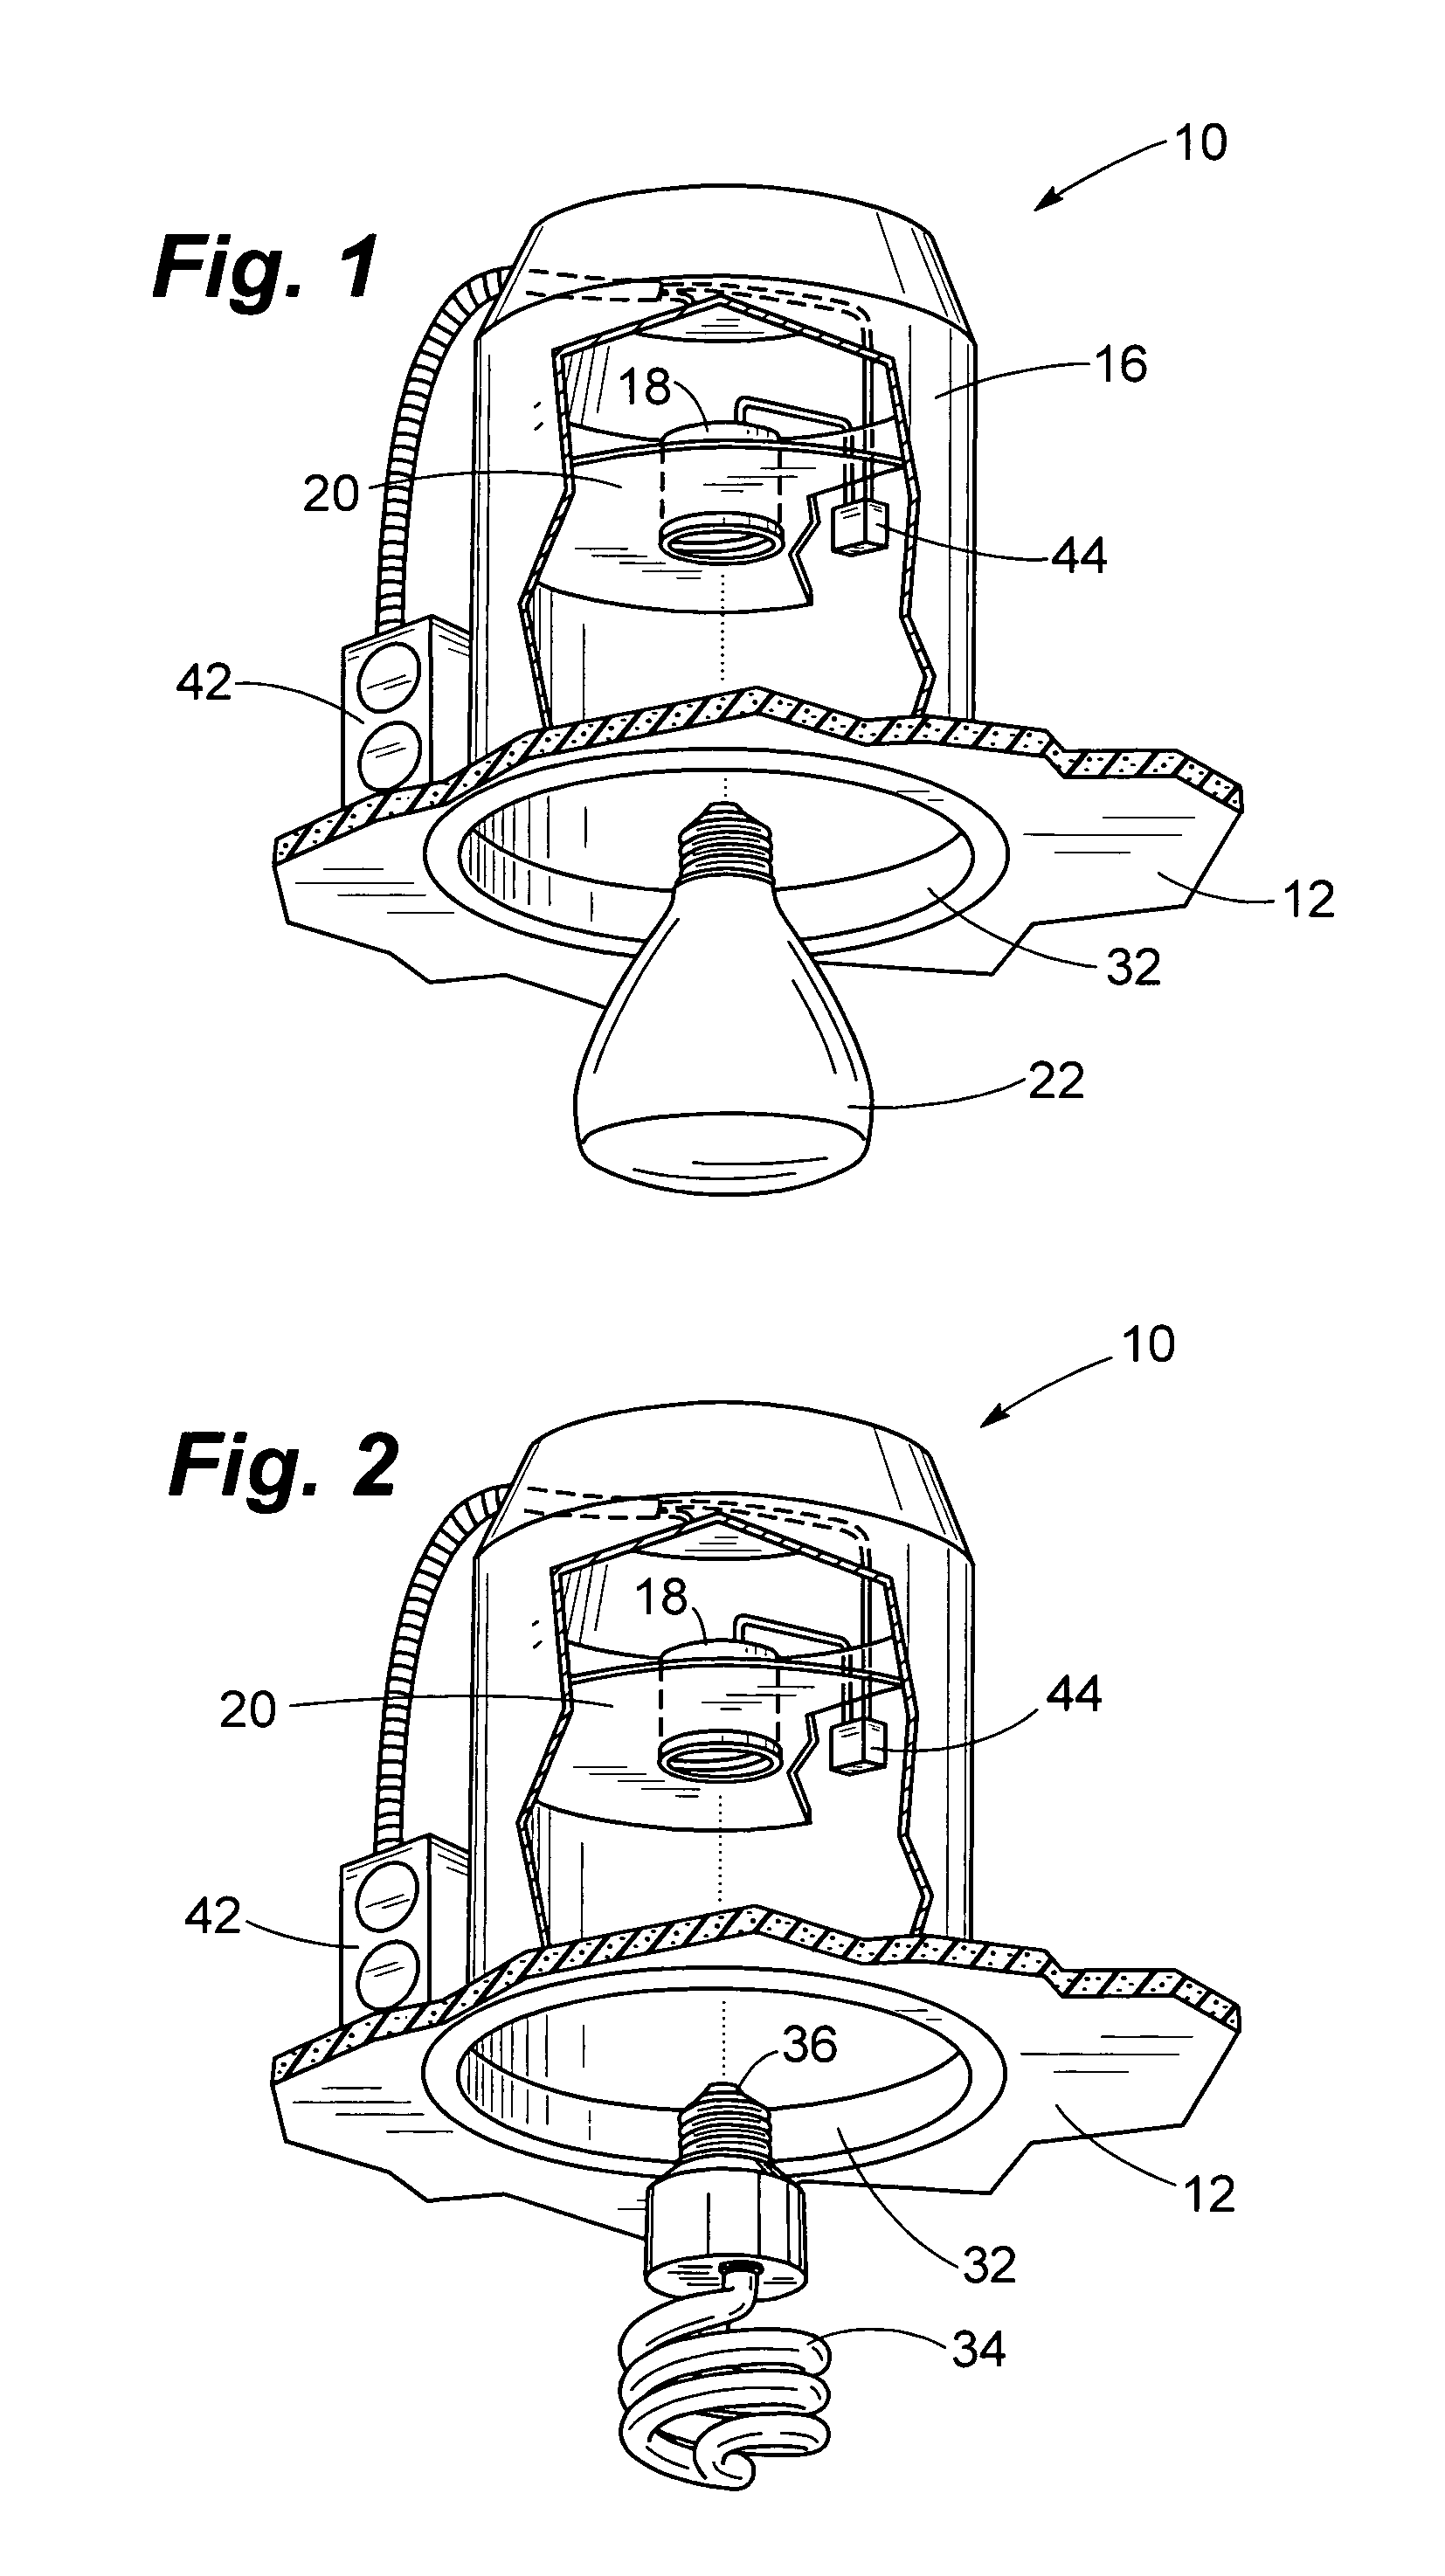 Method and apparatus for assuring compliance with high efficiency lighting standards